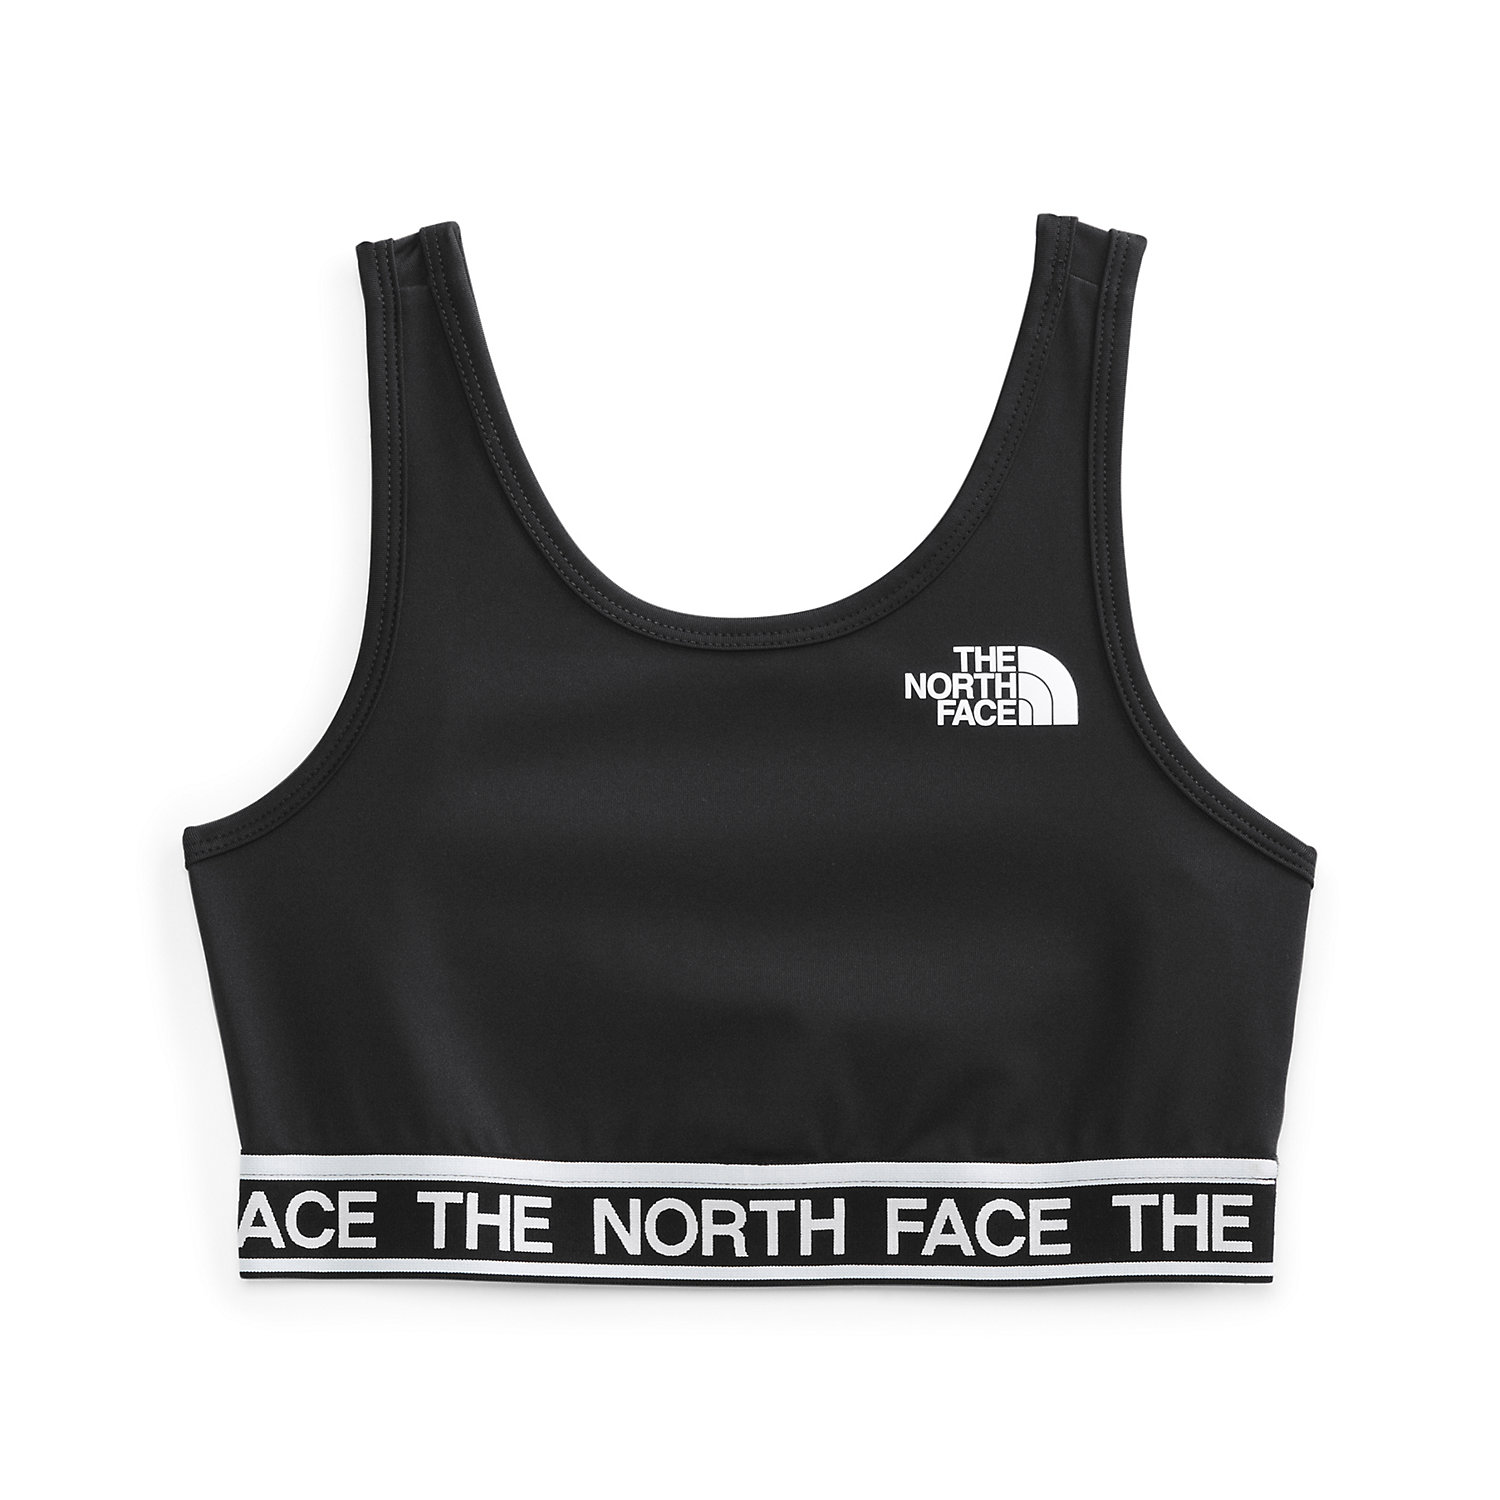 The North Face Girls Bralette